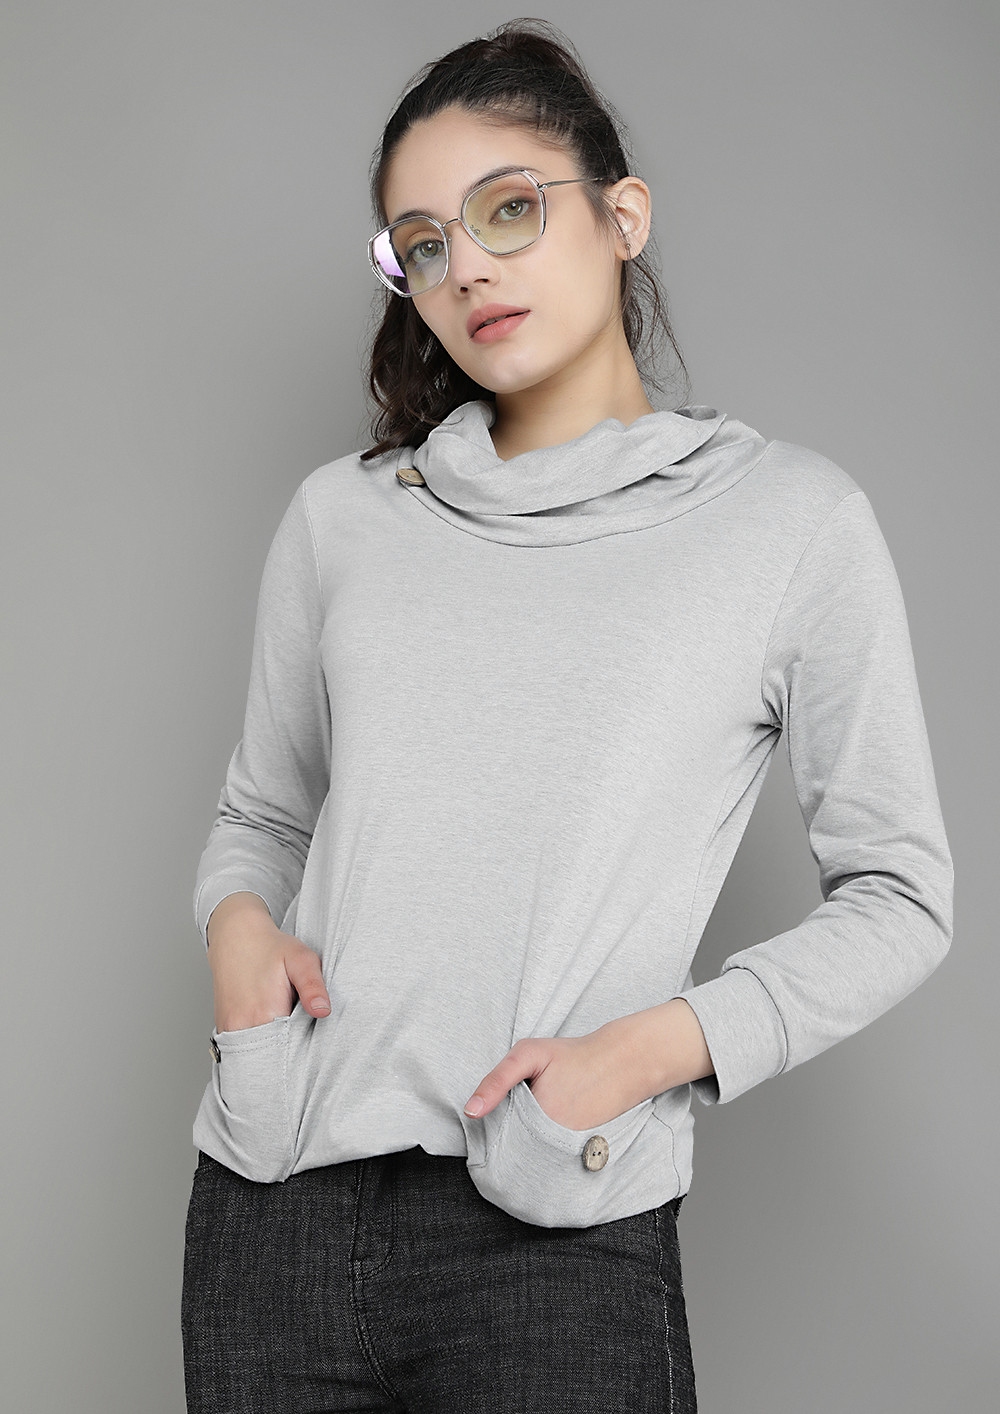 OUT FOR THE CHILL LIGHT GREY SWEATSHIRT